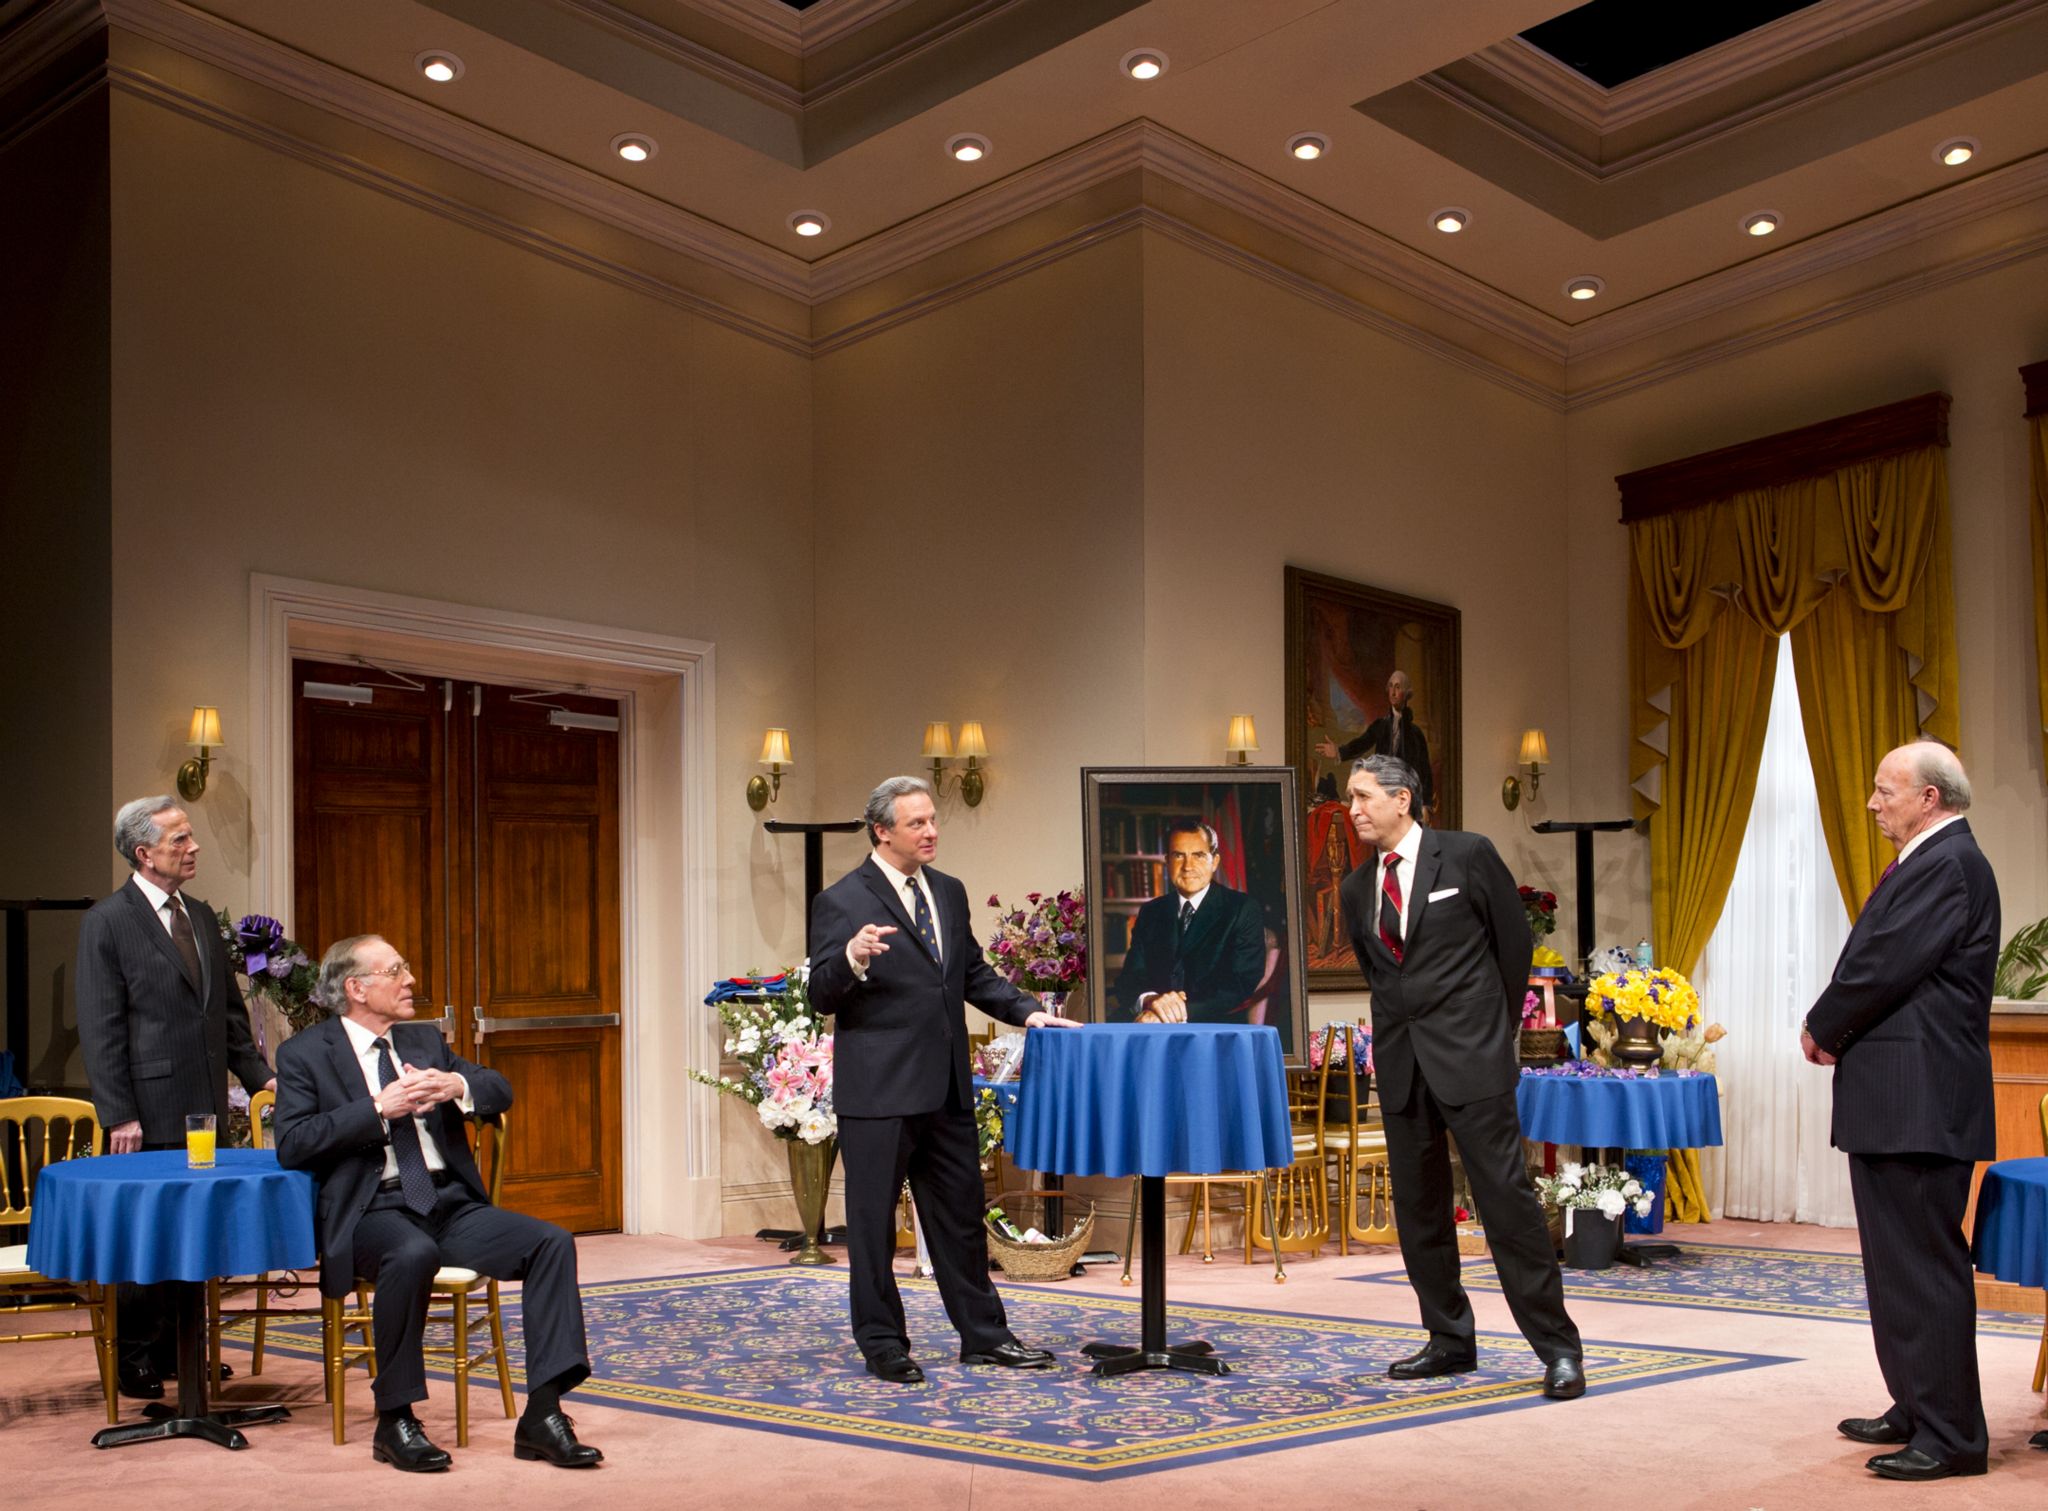 Milwaukee Rep's FIVE PRESIDENTS Humanizes The Habitants Of The Oval Offfice 1 REVIEWED BY: MATTHEW PERTA